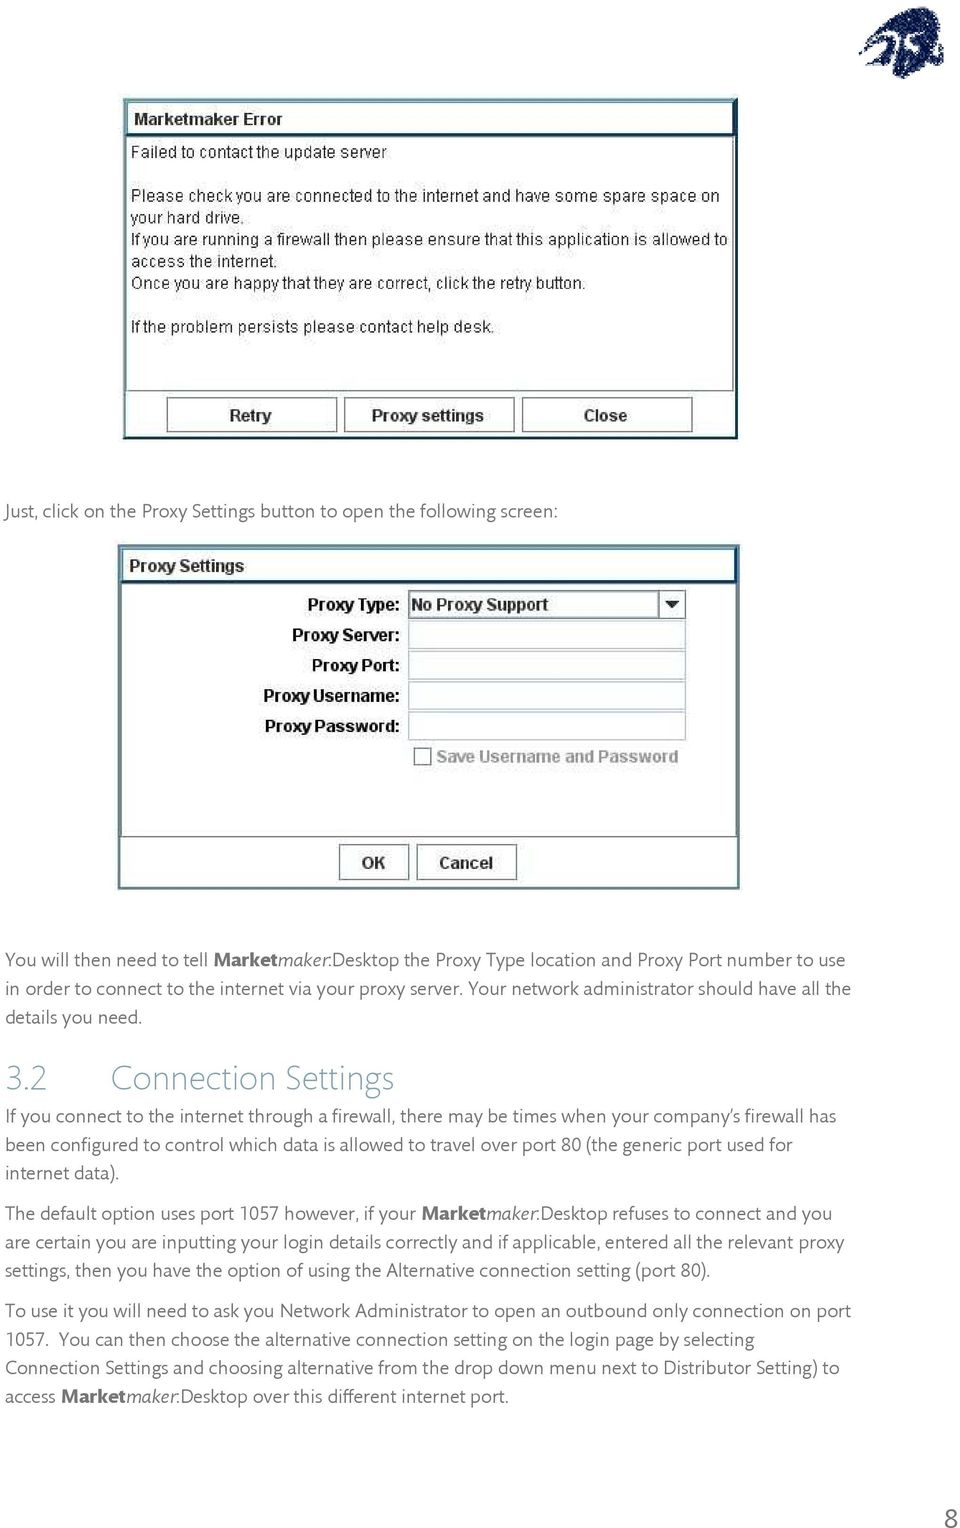 2 Connection Settings If you connect to the internet through a firewall, there may be times when your company s firewall has been configured to control which data is allowed to travel over port 80